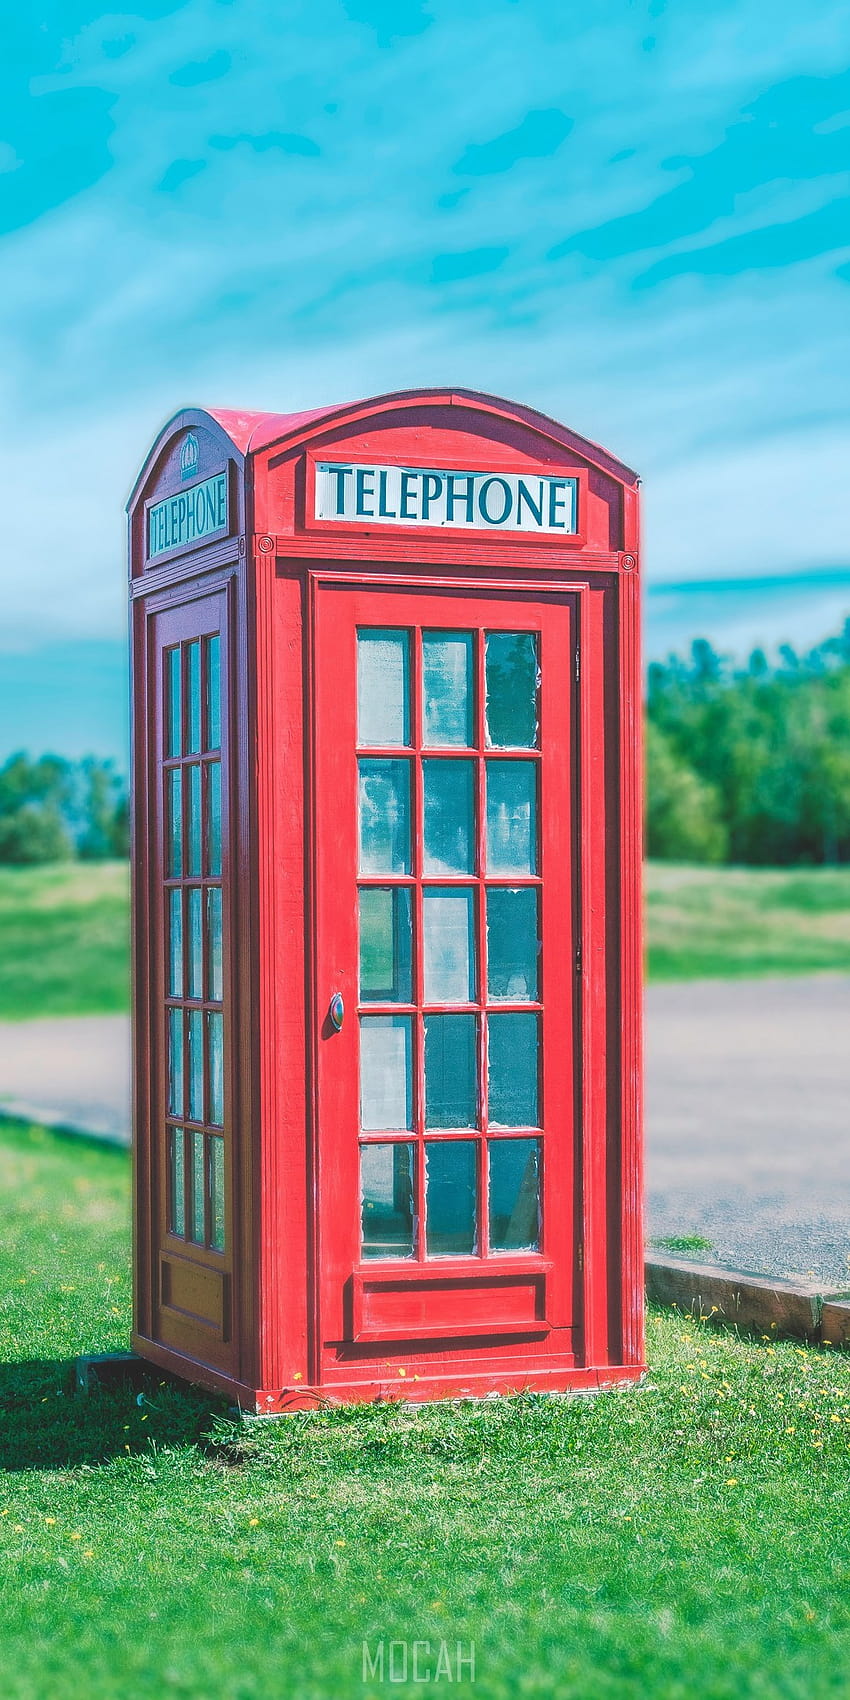 266739 a red telephone booth sits on green grass against a blue sky, telephone booth in grass, Samsung Galaxy Note 10 Lite , 1080x2400 HD 전화 배경 화면